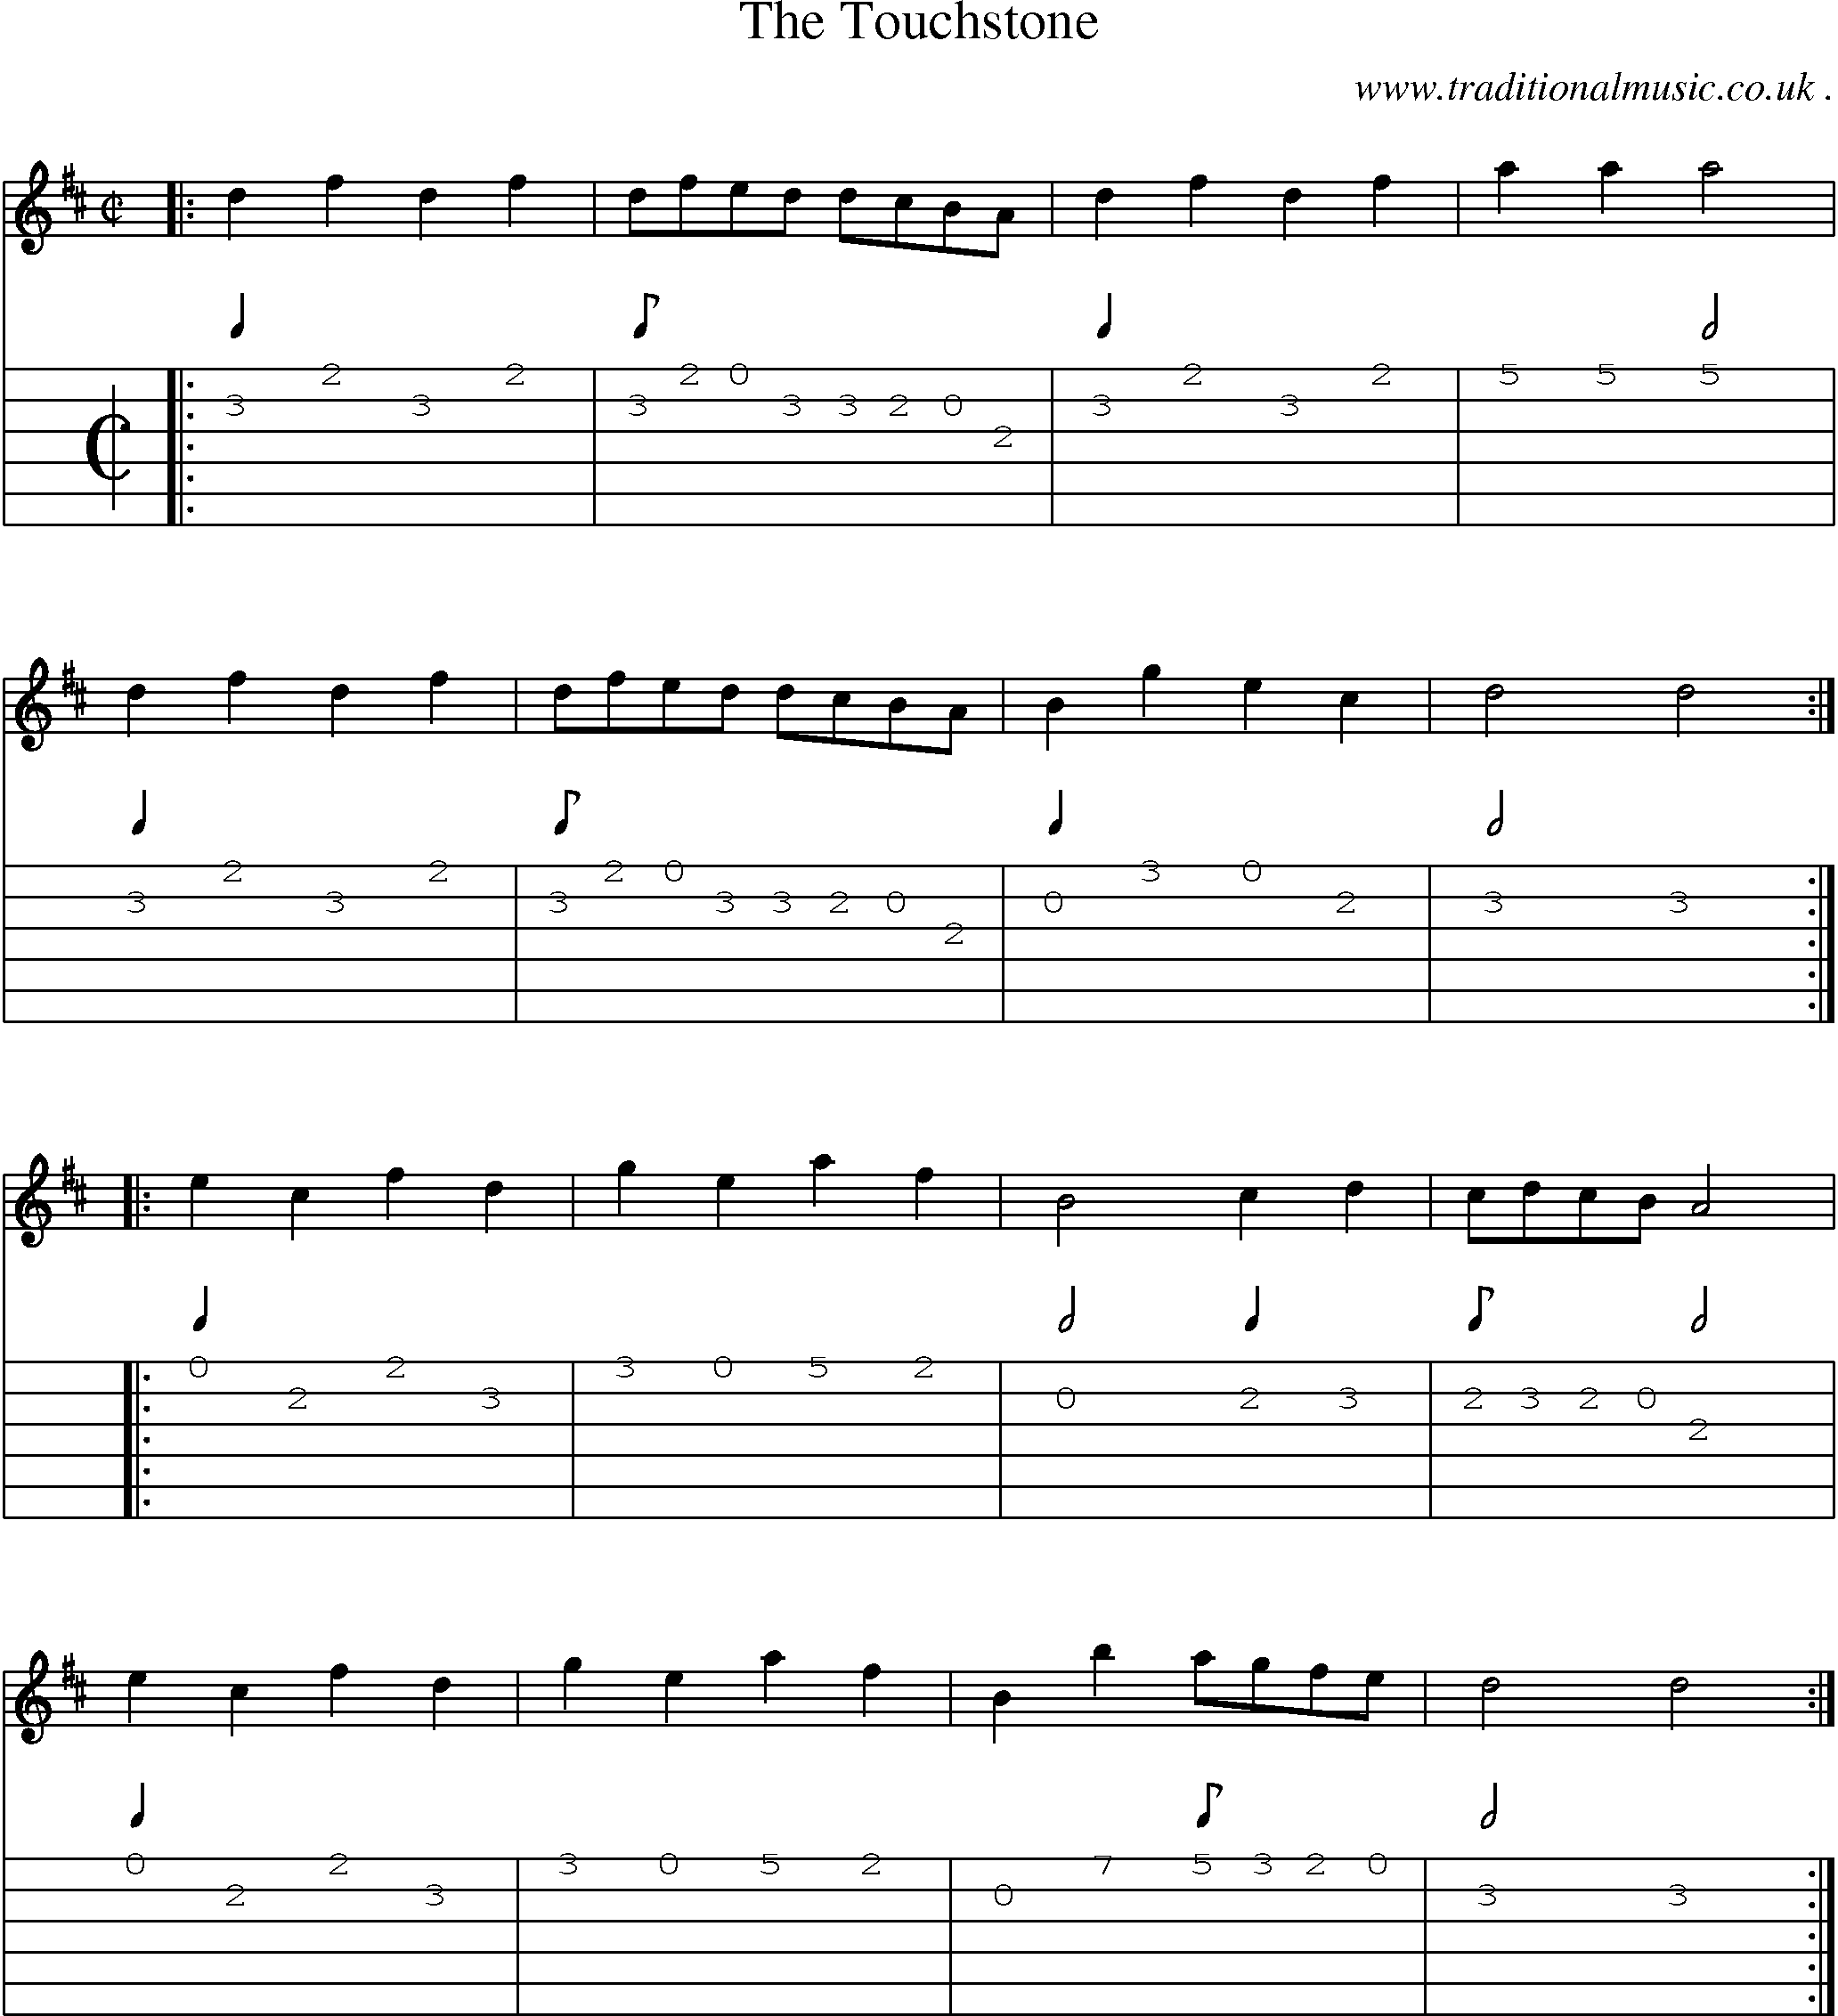 Sheet-Music and Guitar Tabs for The Touchstone